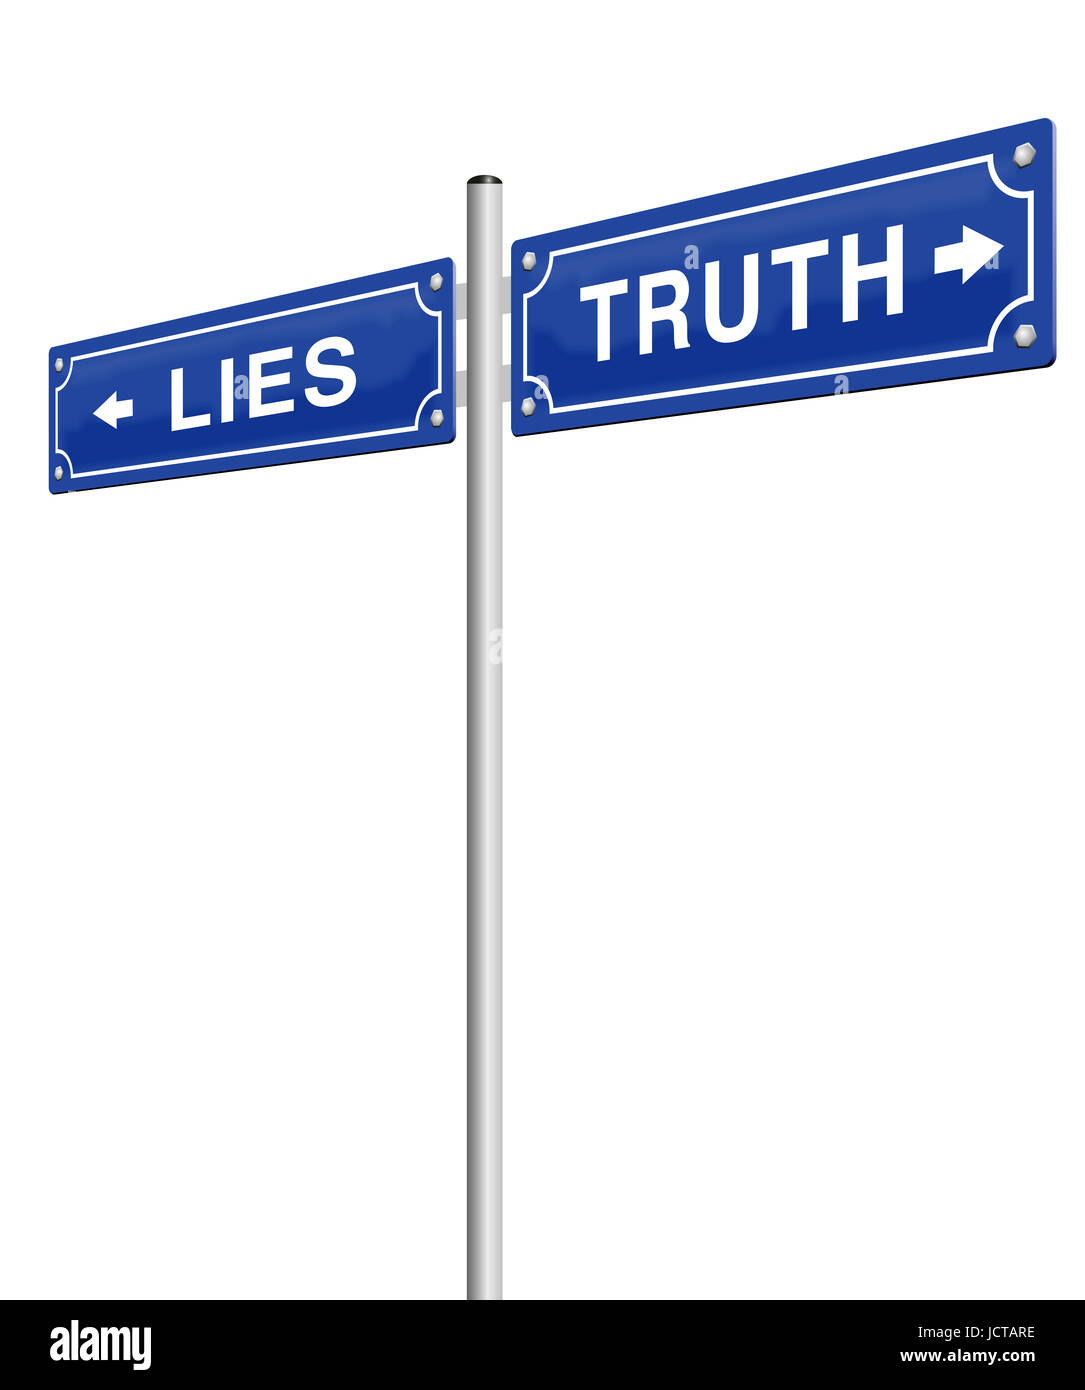 LIES TRUTH street sign - you decide which path you choose, deception or honesty, fraud or verity, fake or facts. Stock Photo